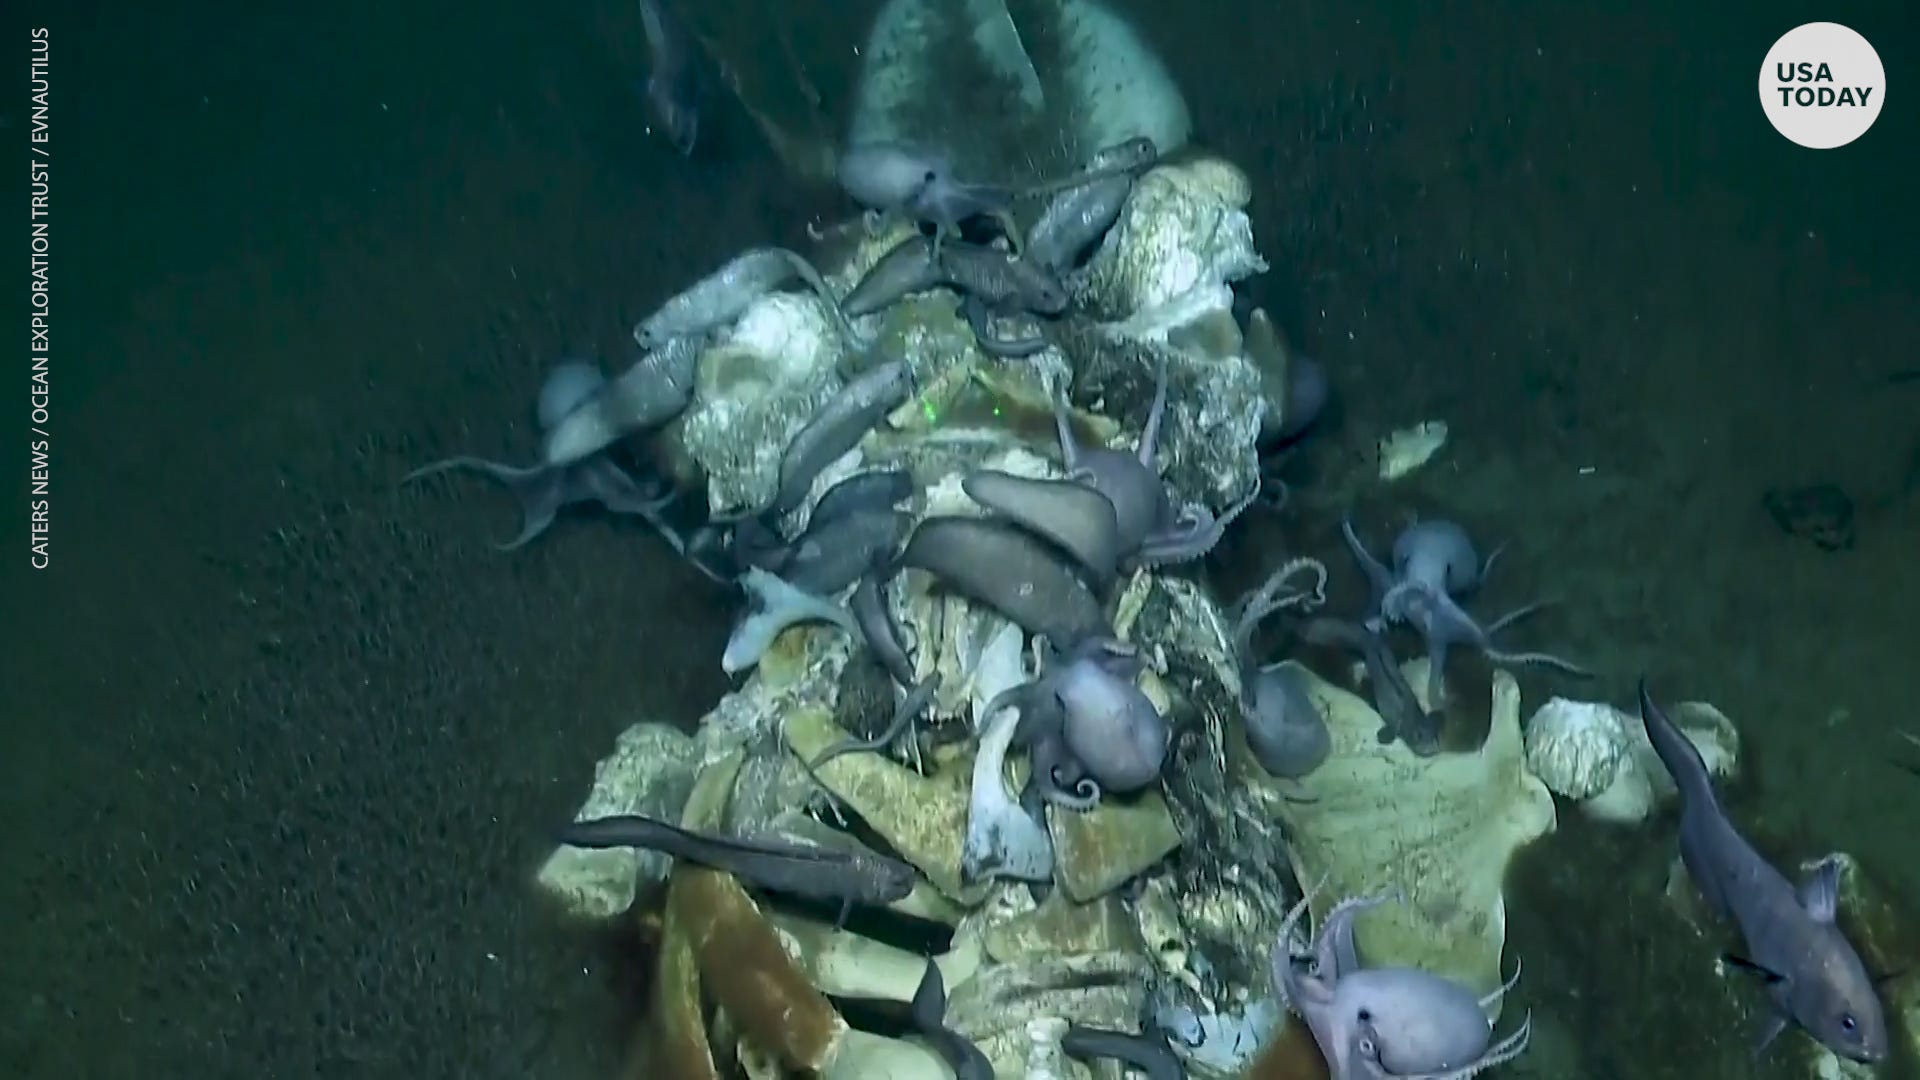 Scientists Giddy Over Rare Sight Of Octopuses Eating Whale Carcass